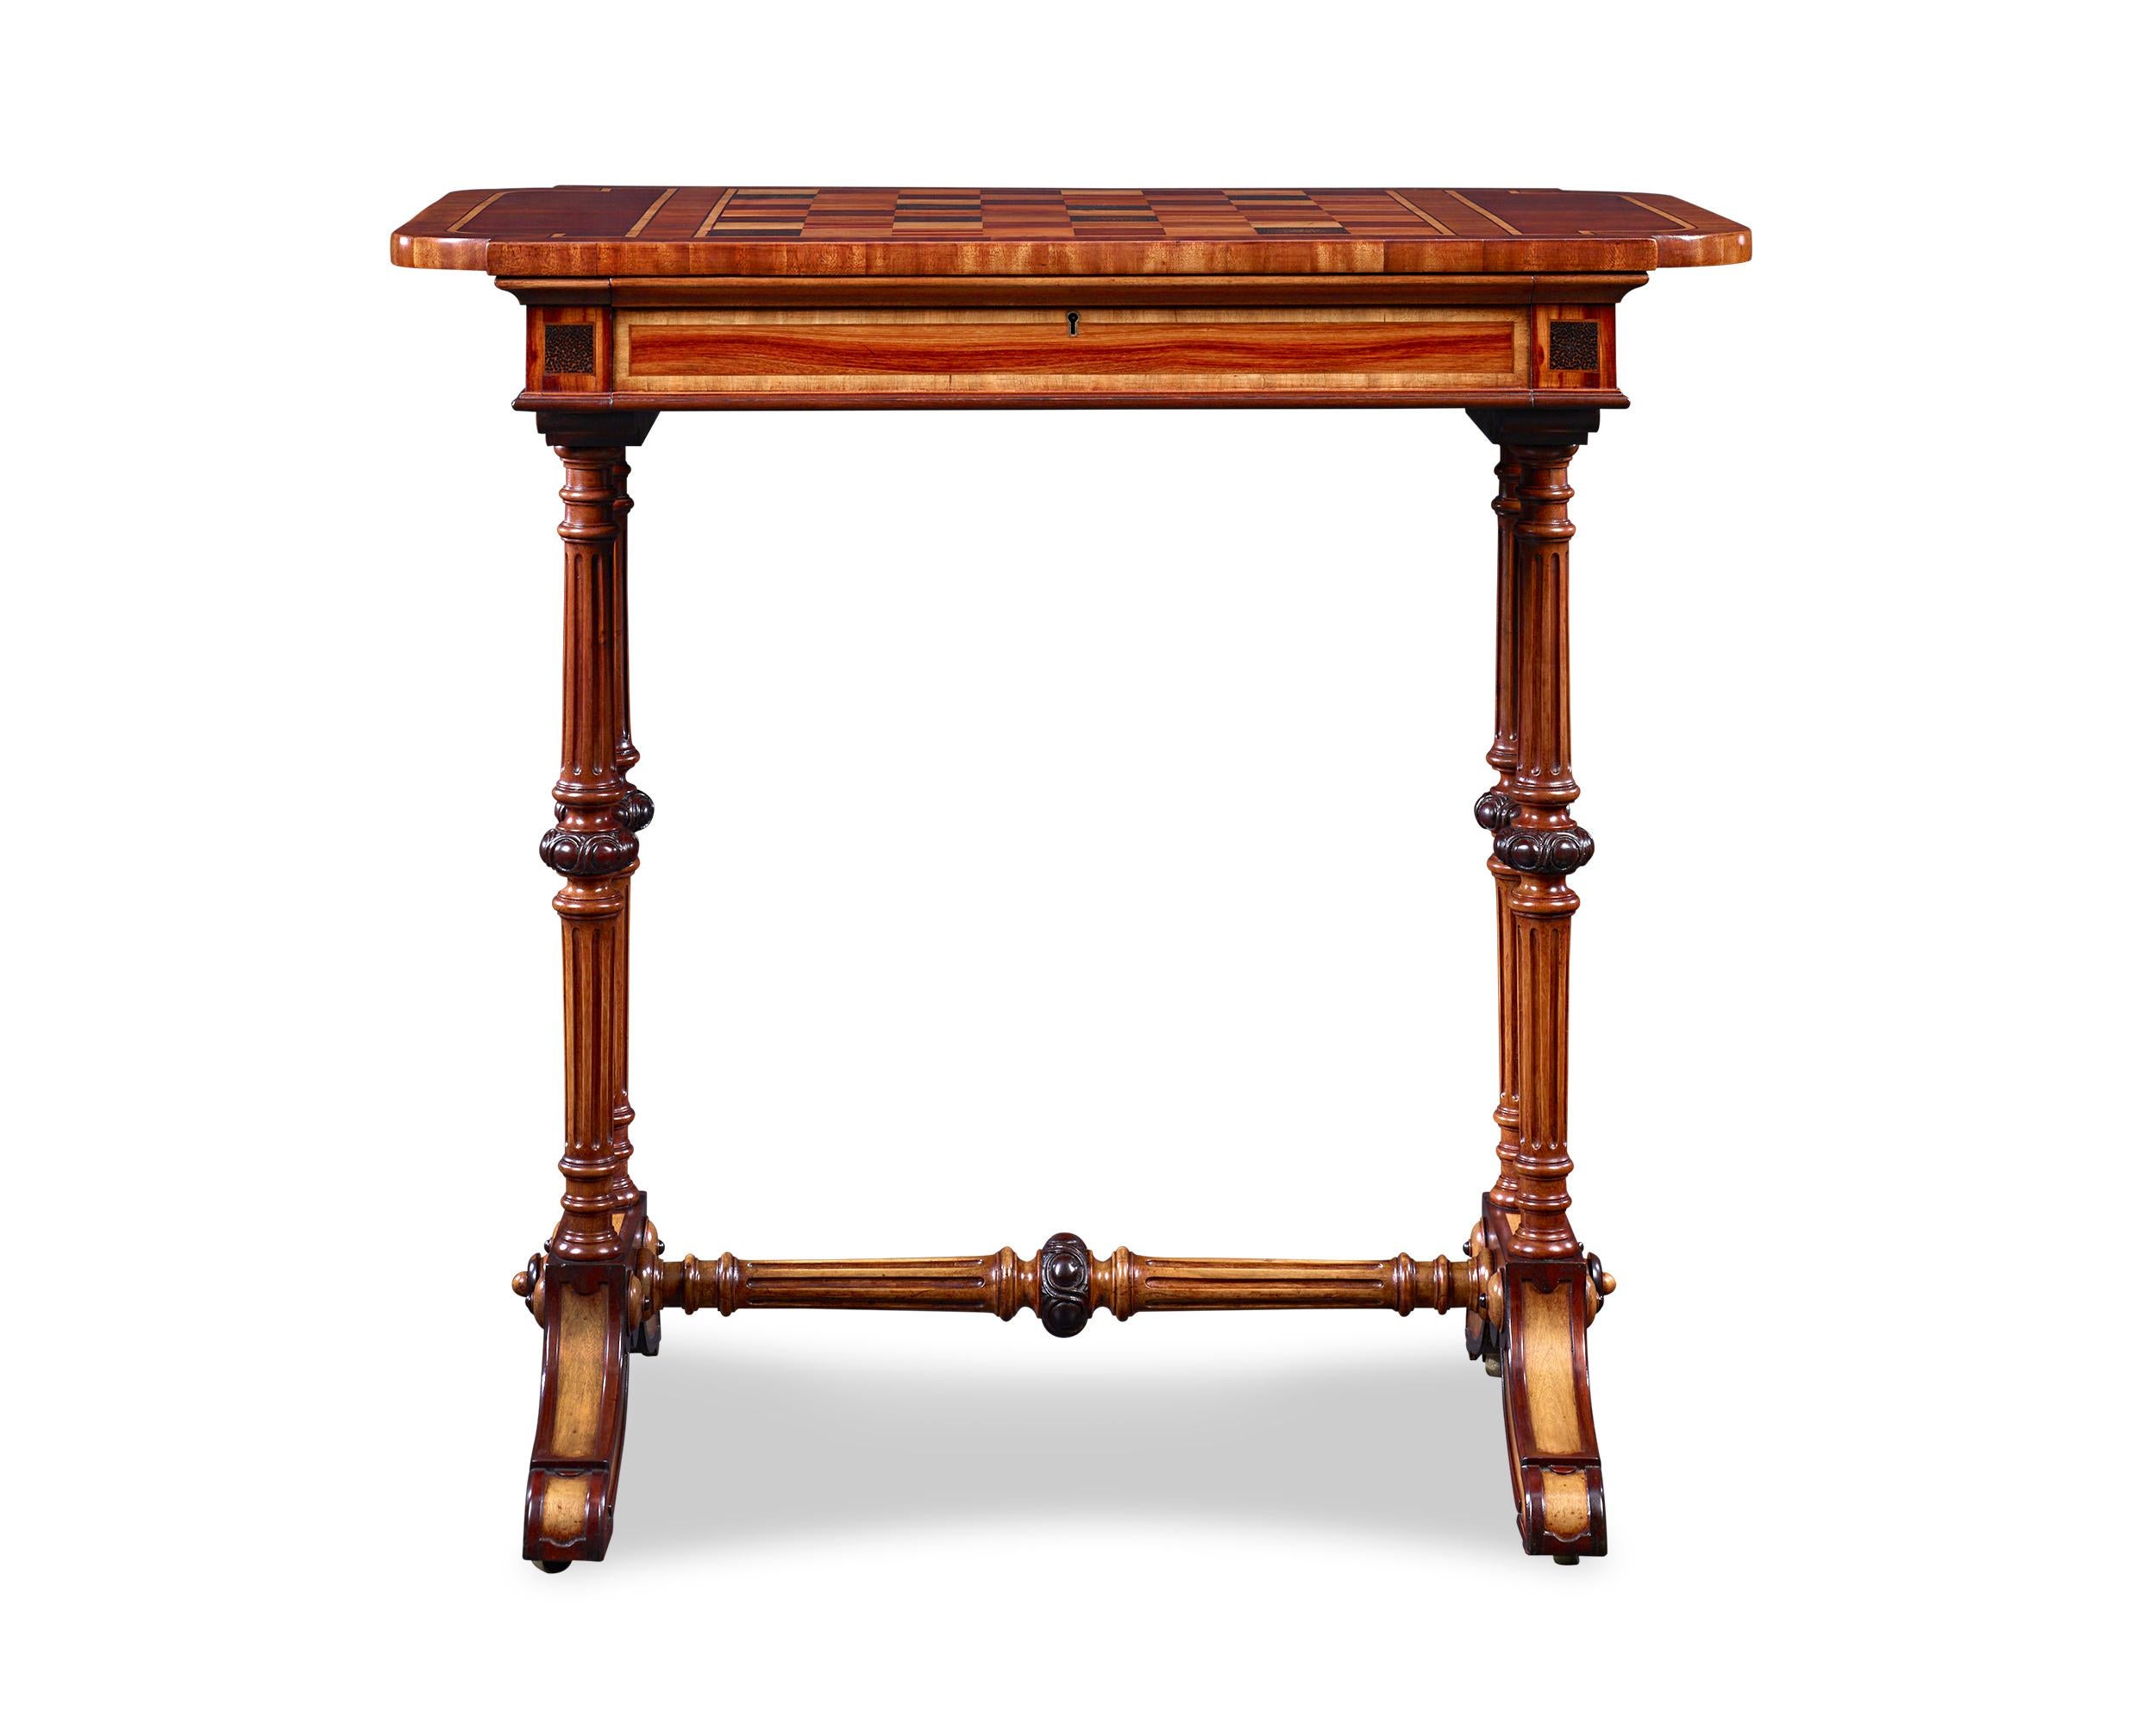 An array of exotic Caribbean and South American woods are featured in this exceptional 19th-century West Indian games table. Evocative of the designs of the great Scottish furniture maker Ralph Turnbull, the table is beautiful in both design and